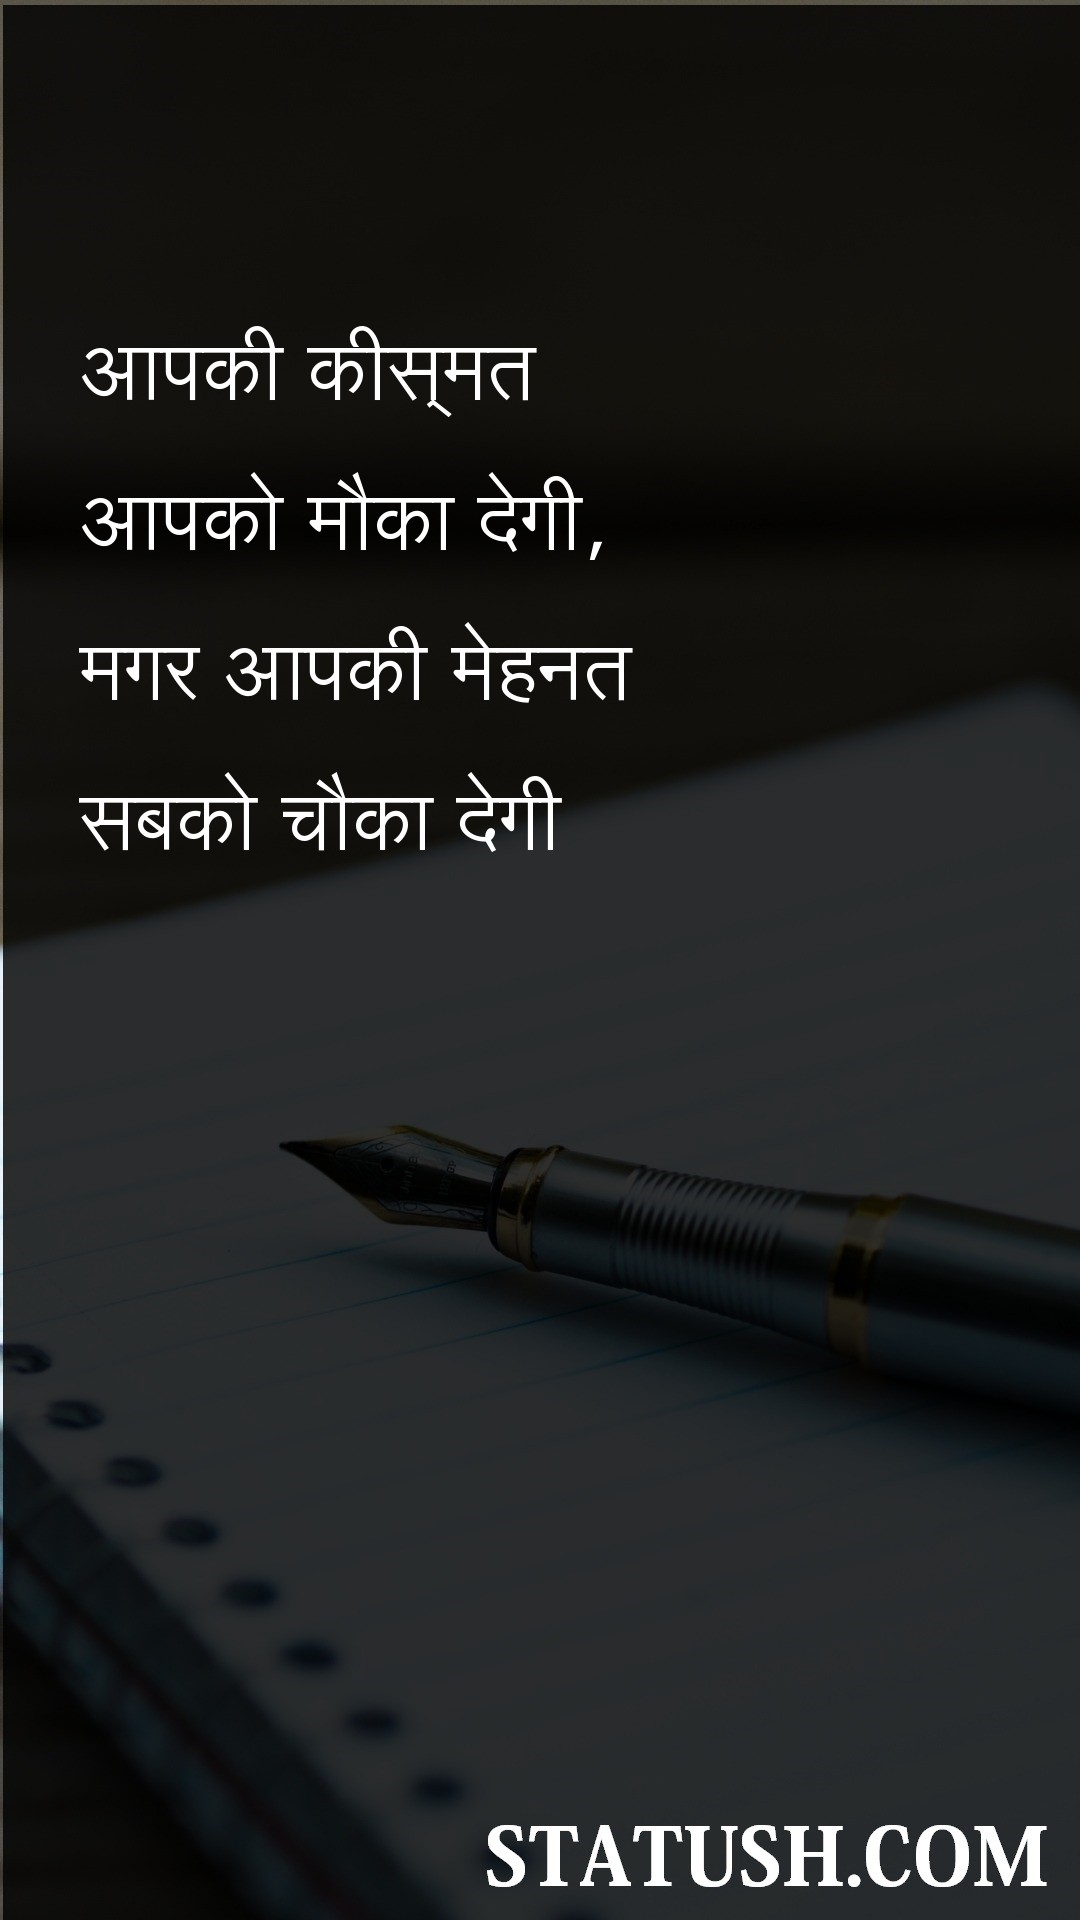 Your luck will give you a chance - Hindi Quotes at statush.com